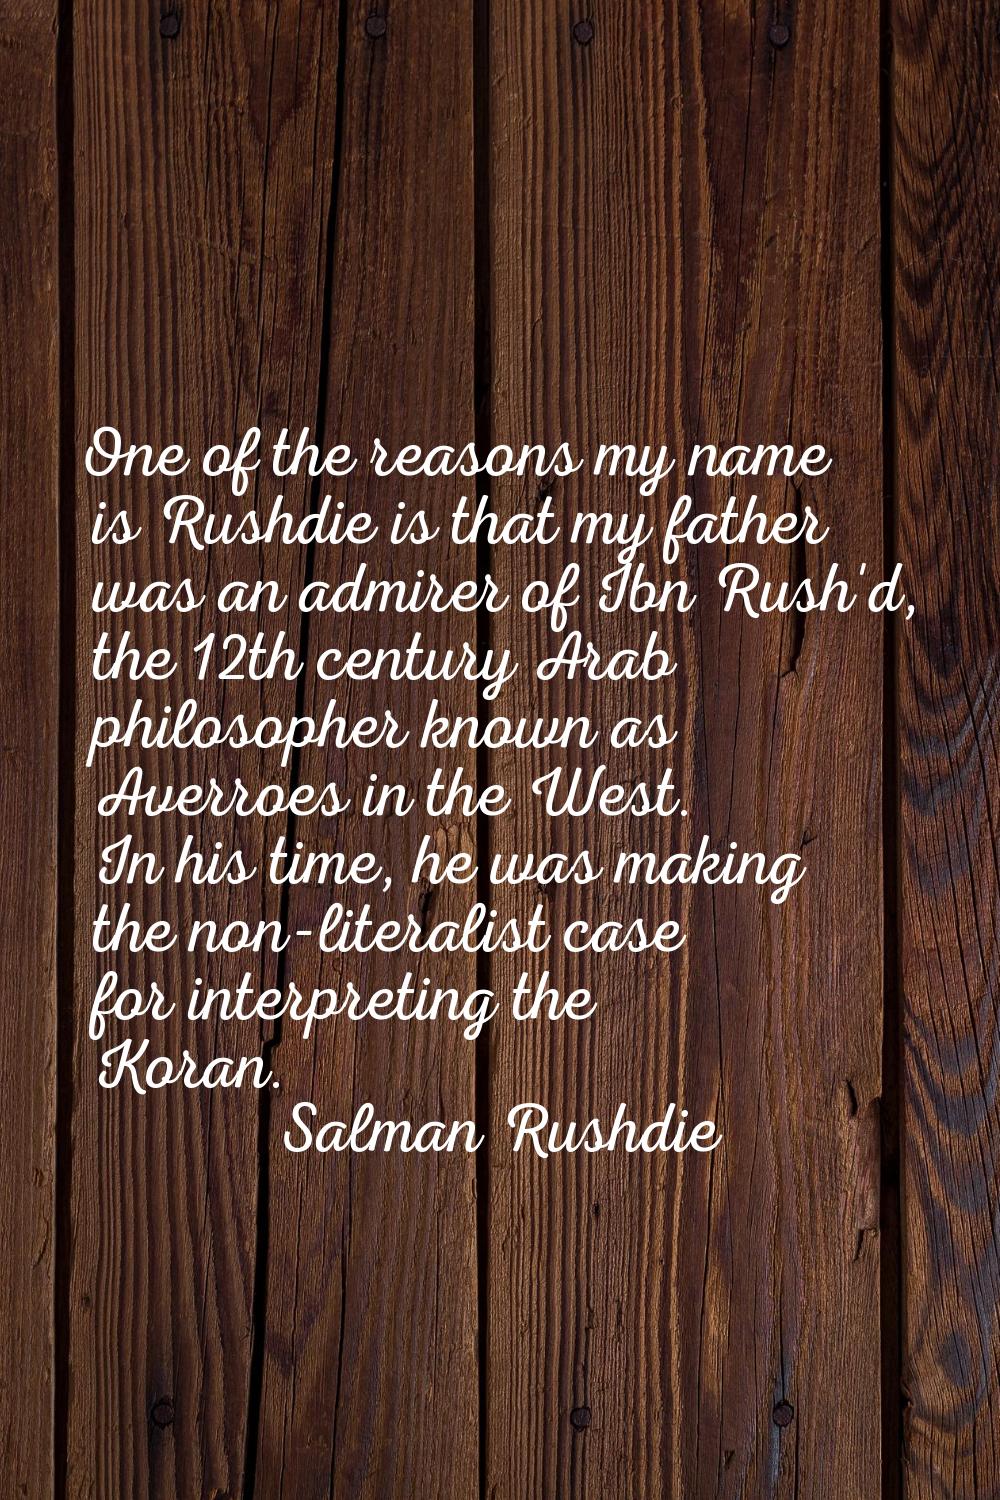 One of the reasons my name is Rushdie is that my father was an admirer of Ibn Rush'd, the 12th cent